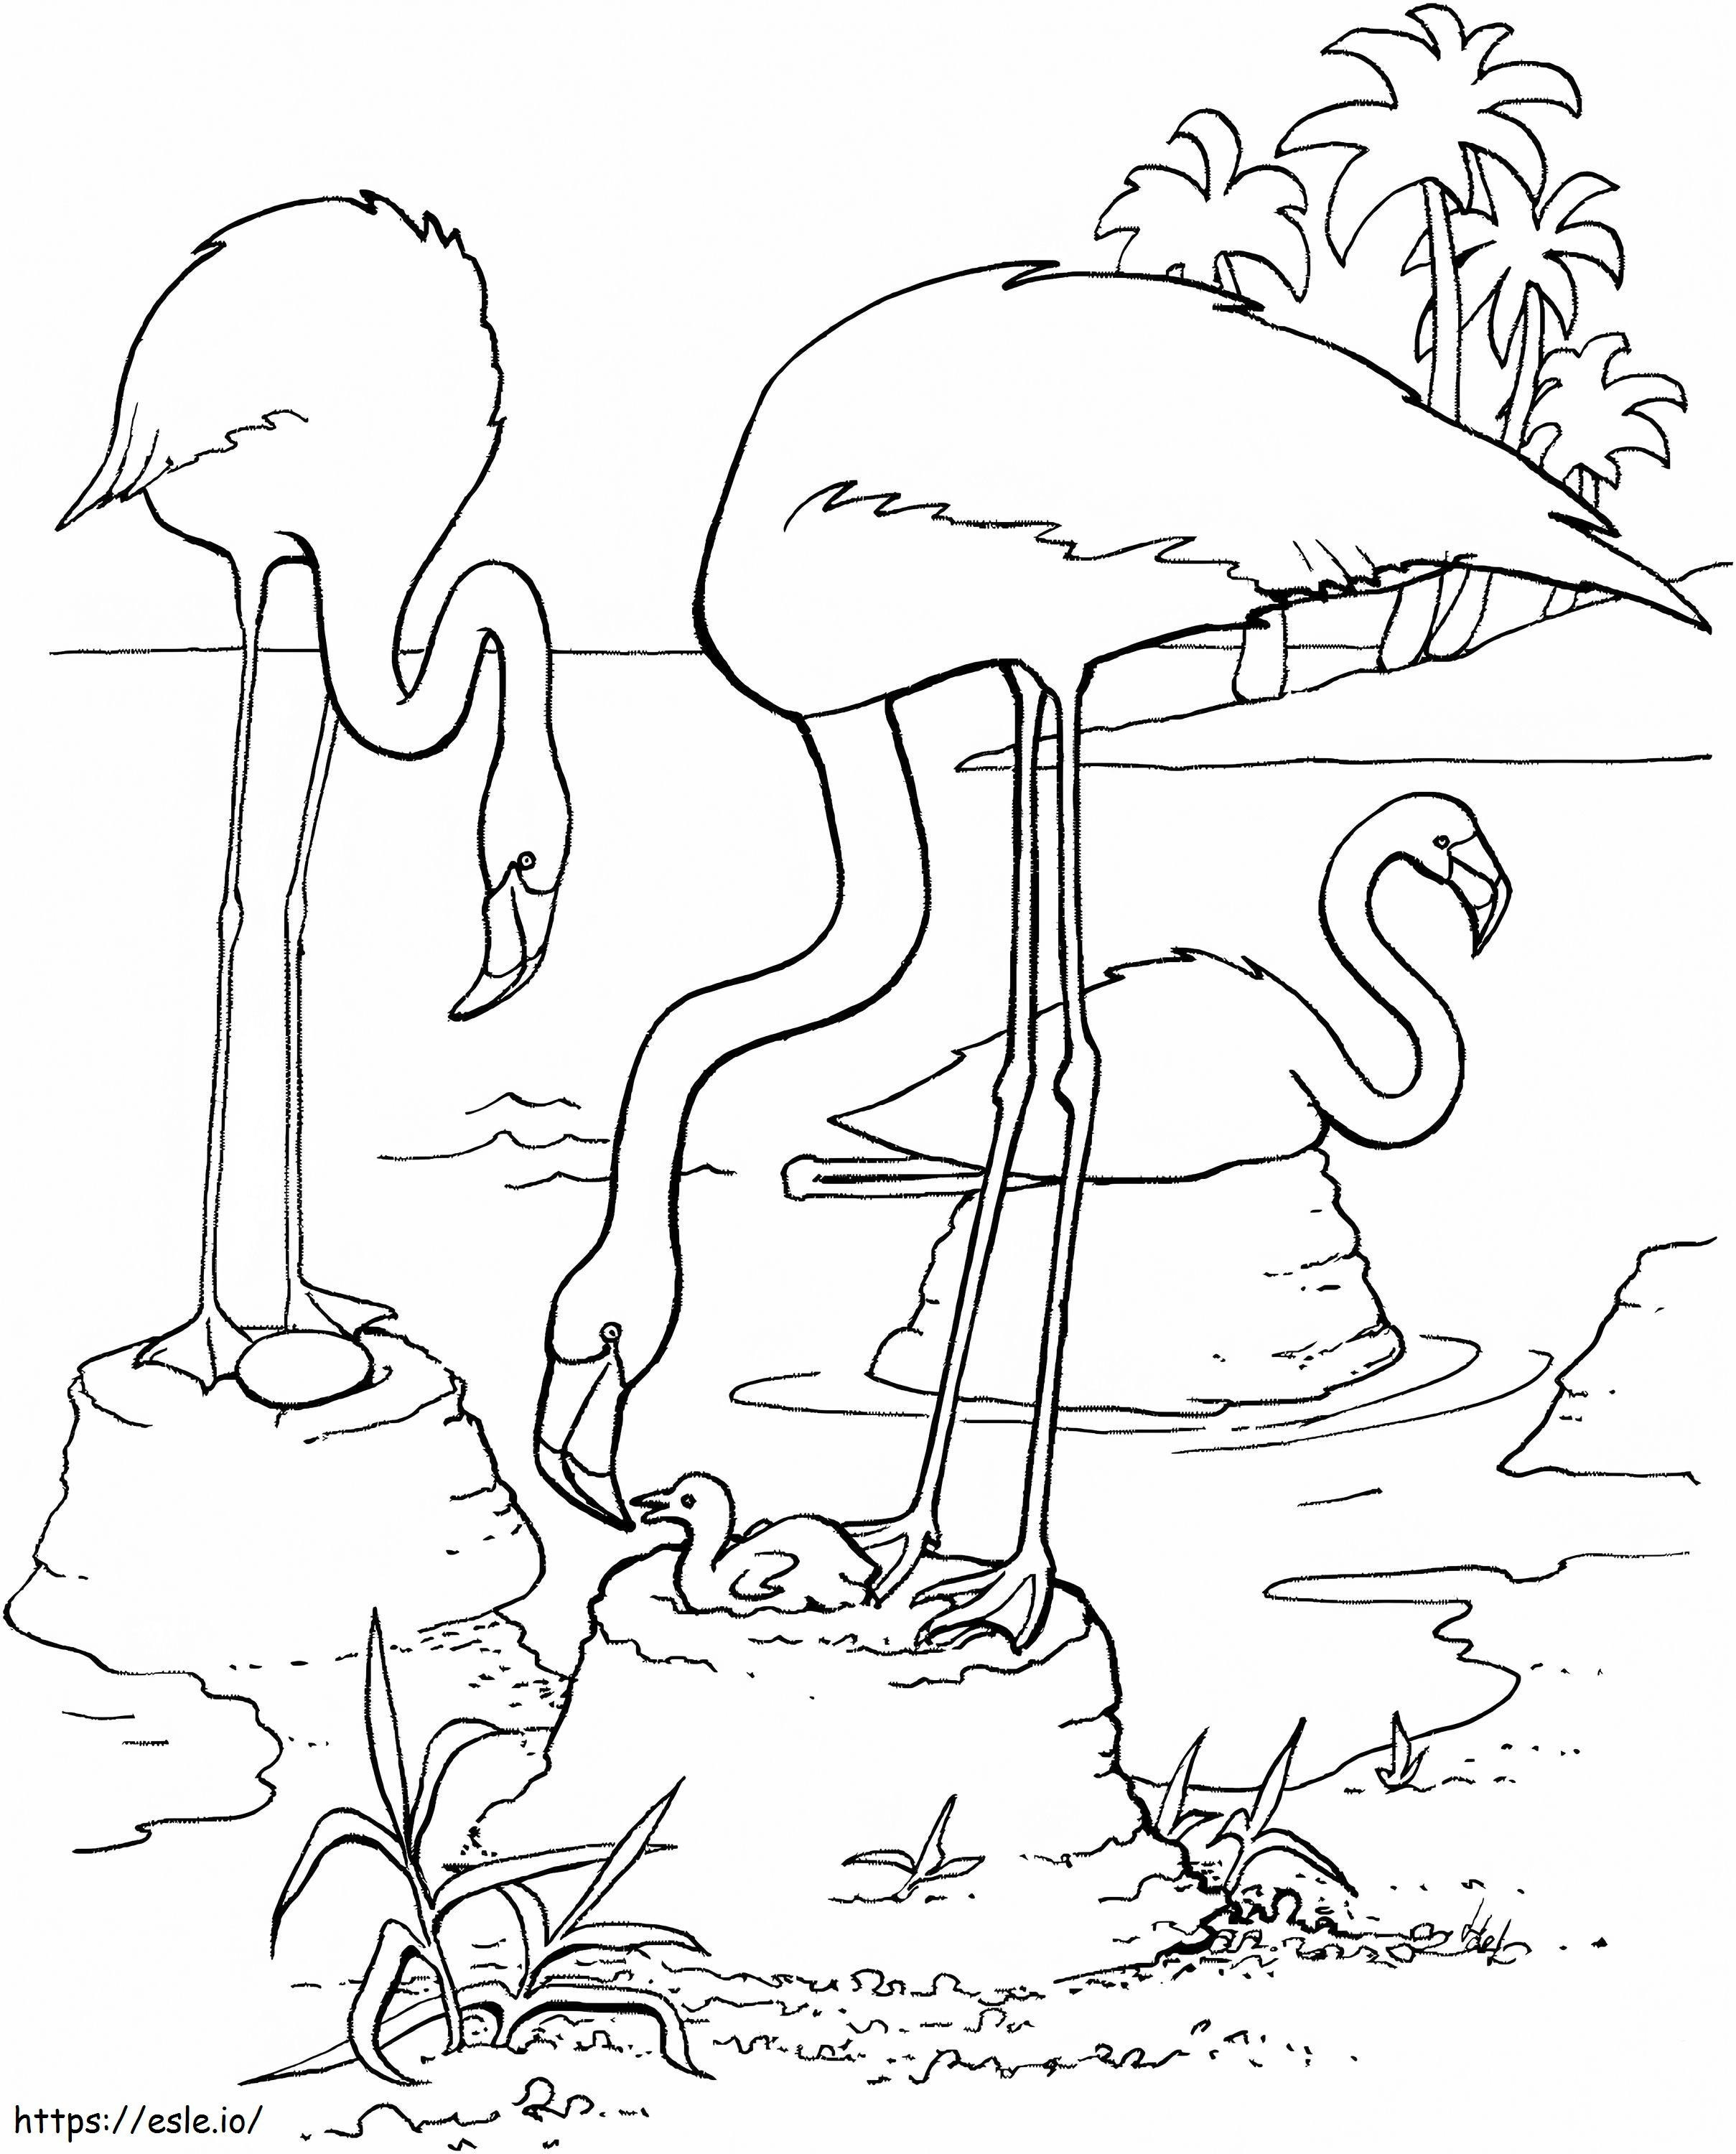 Flamingo Feeding Its Chick coloring page